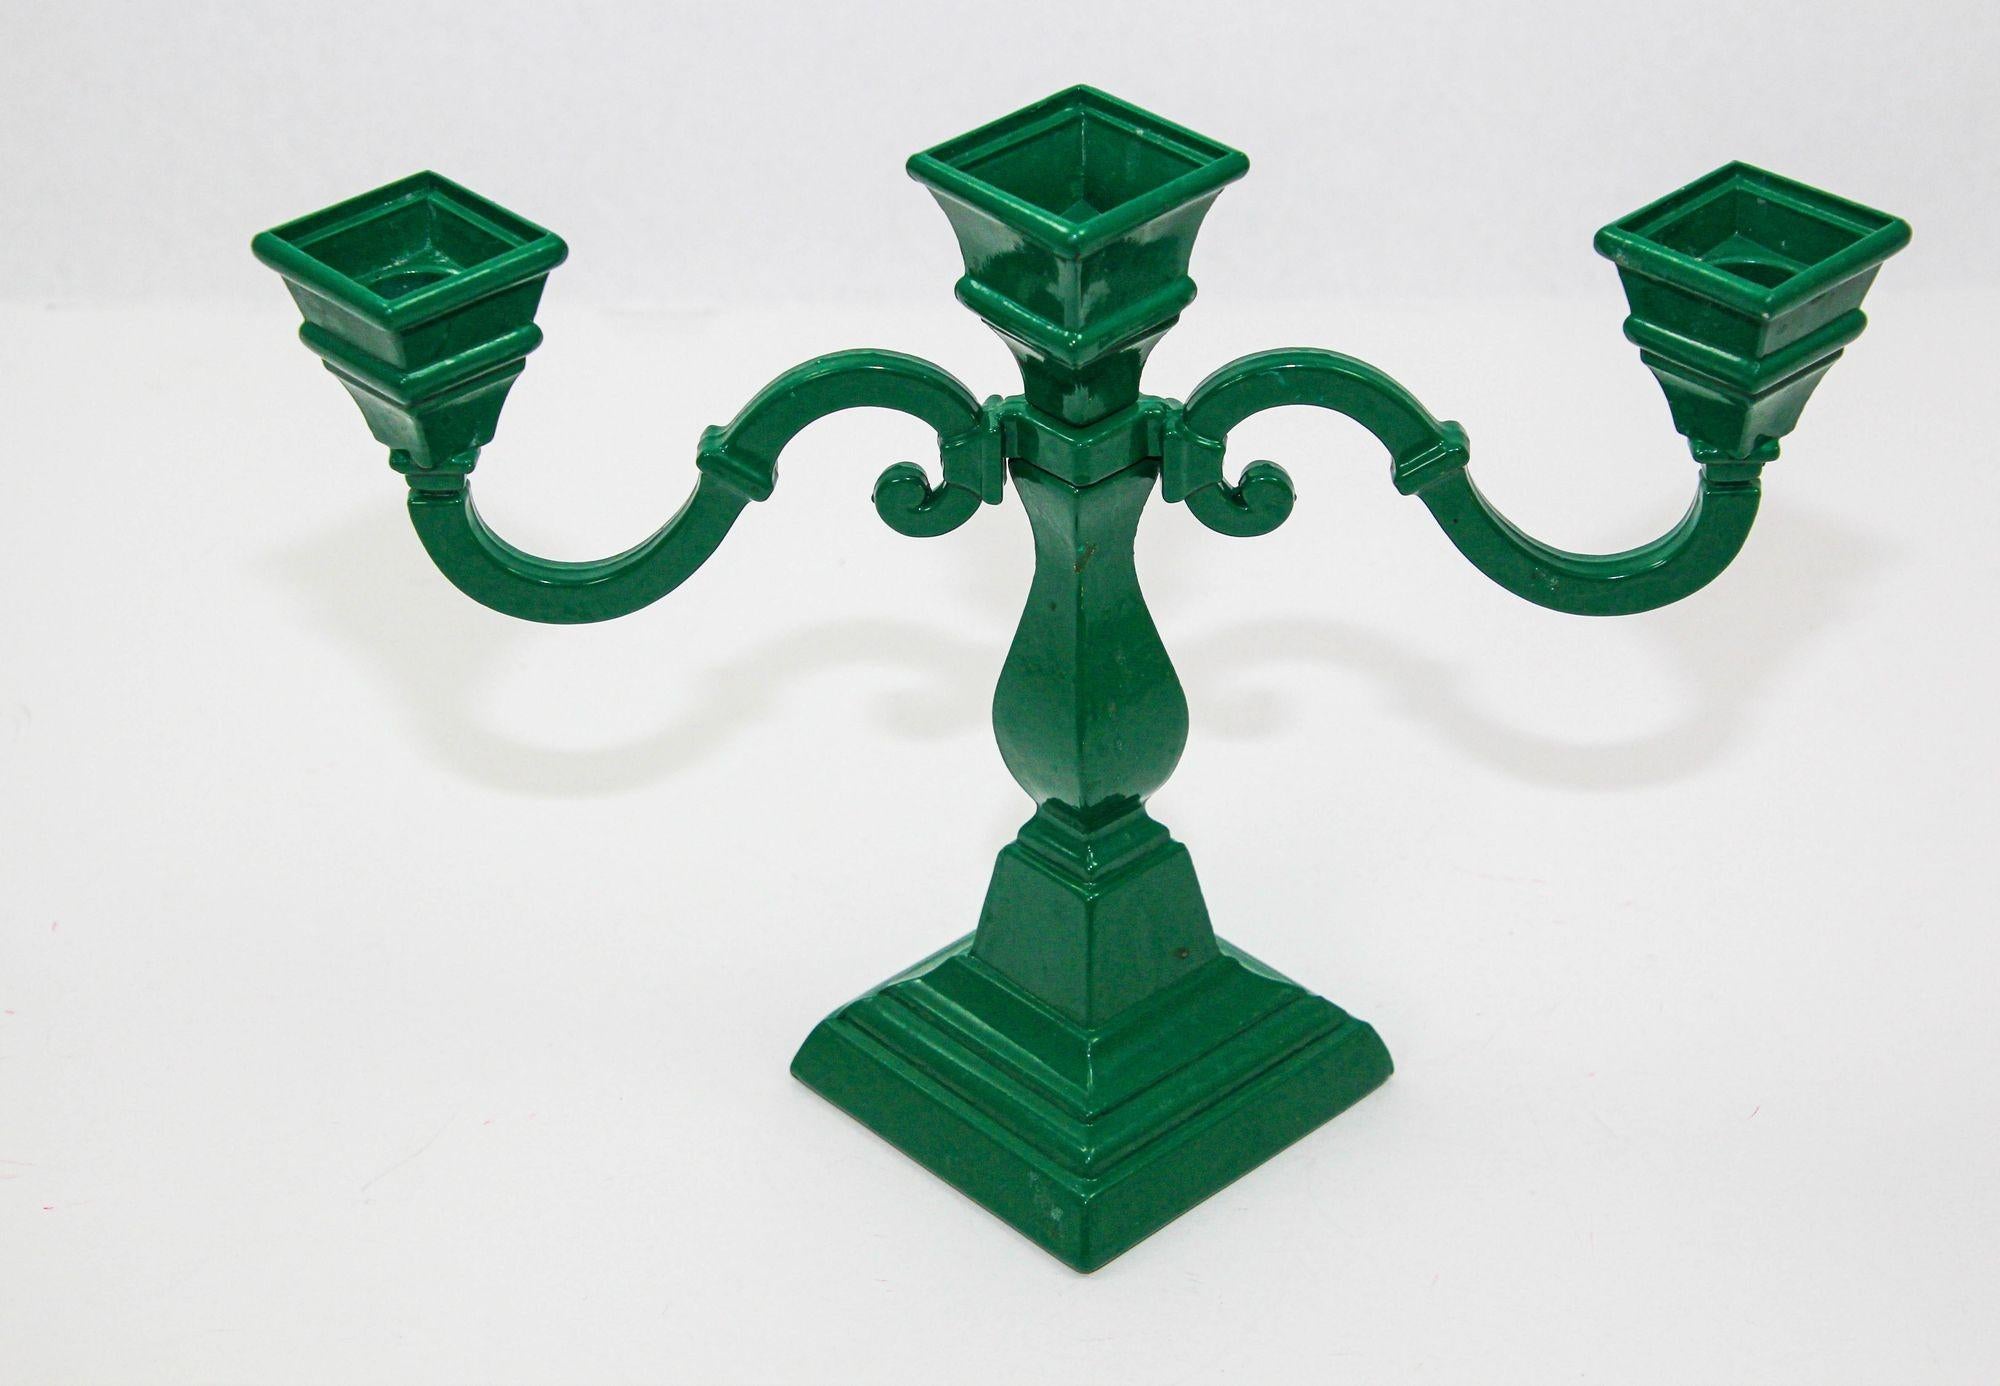 Vintage metal hunter green candelabra, circa 1970s.
Heavy cast vintage metal shiny English hunter forest green candelabra with 3 branches.
The candelabra can hold 3 candles, it will be beautiful in any style of interior, Organic Modern, Claassic,